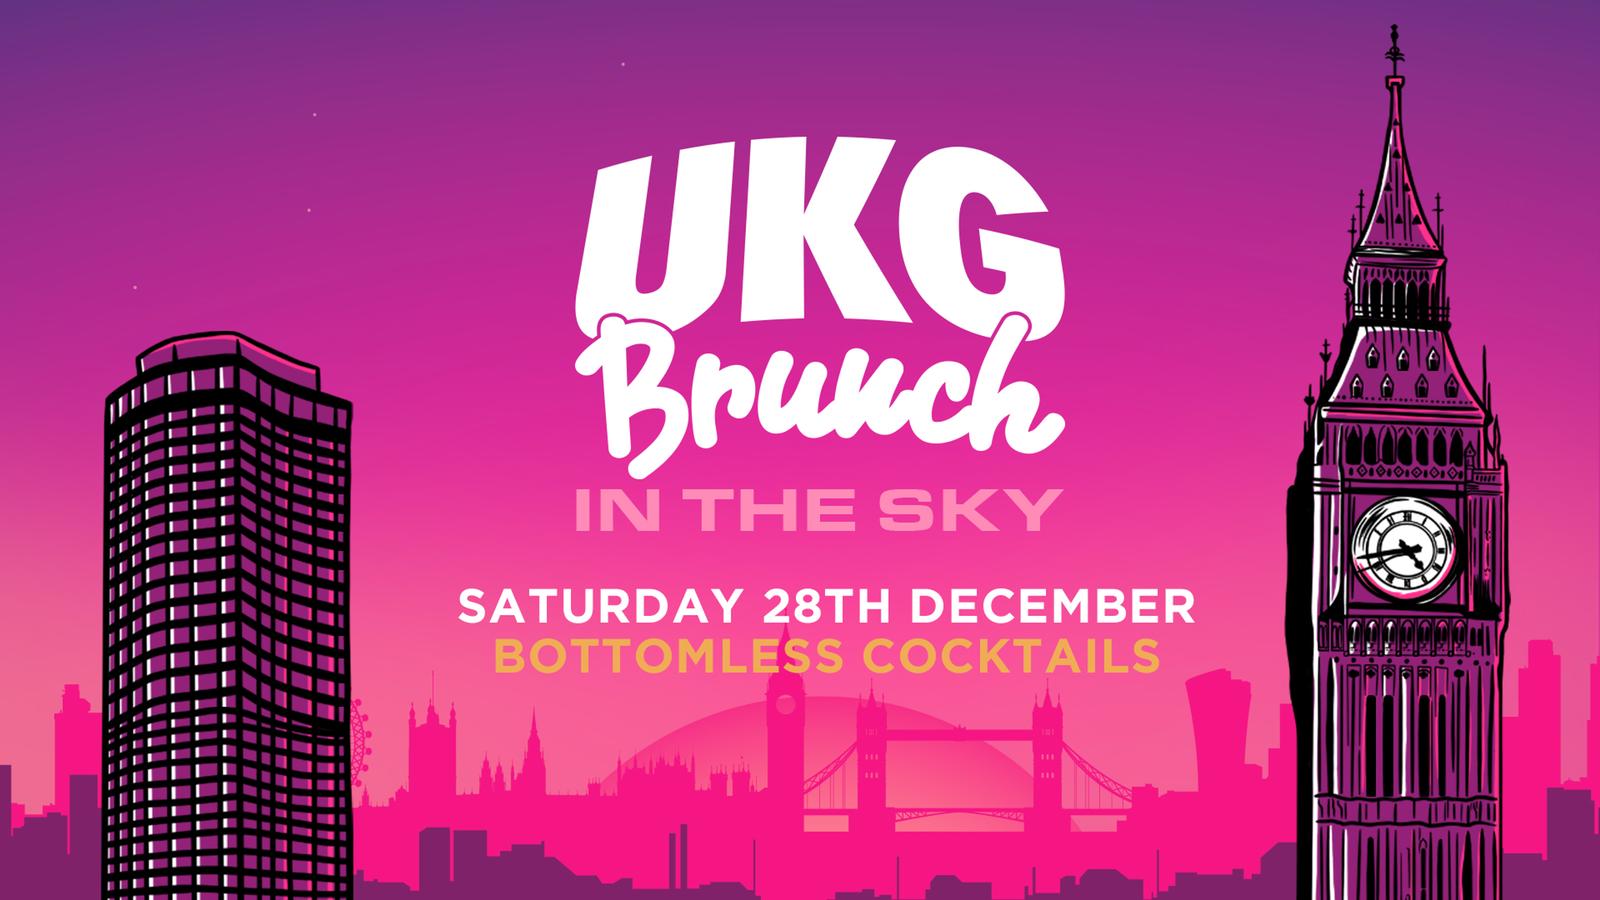 UKG BRUNCH IN THE SKY at London, London on 28th Dec 2019 | Fatsoma